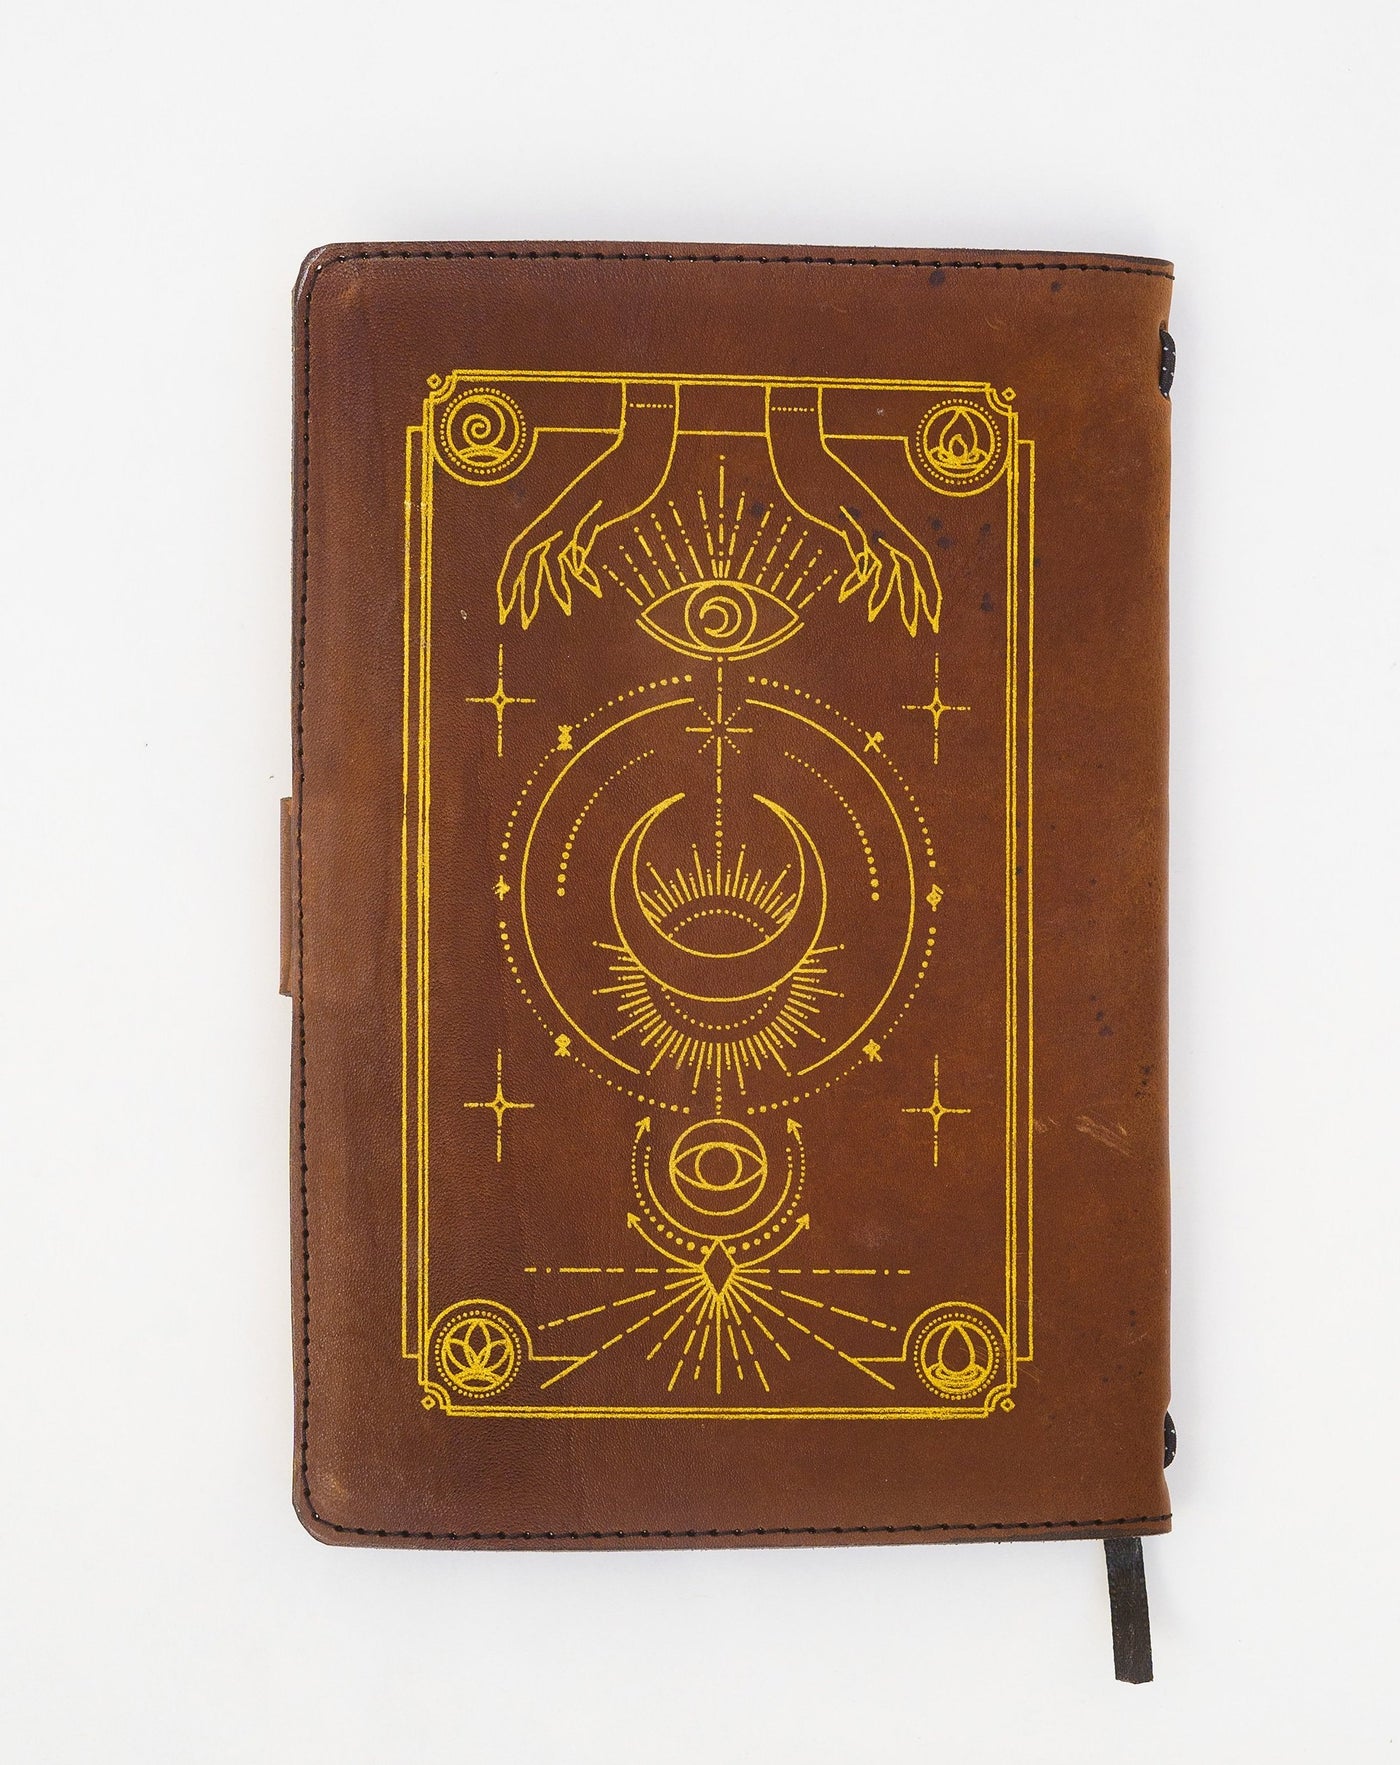 Large Leather Journal